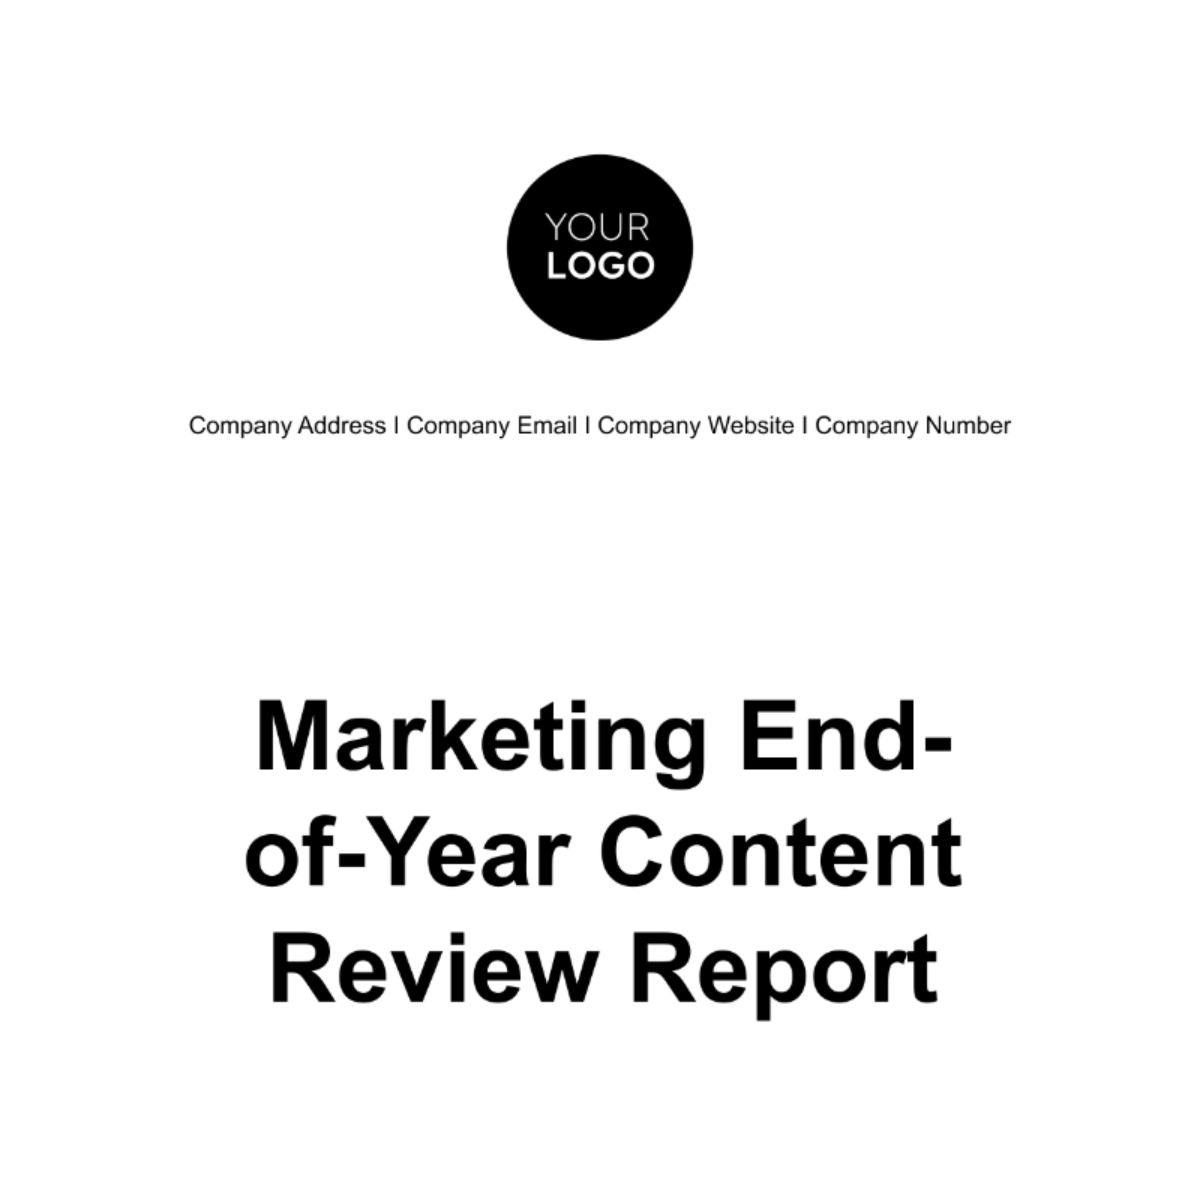 Marketing End-of-Year Content Review Report Template